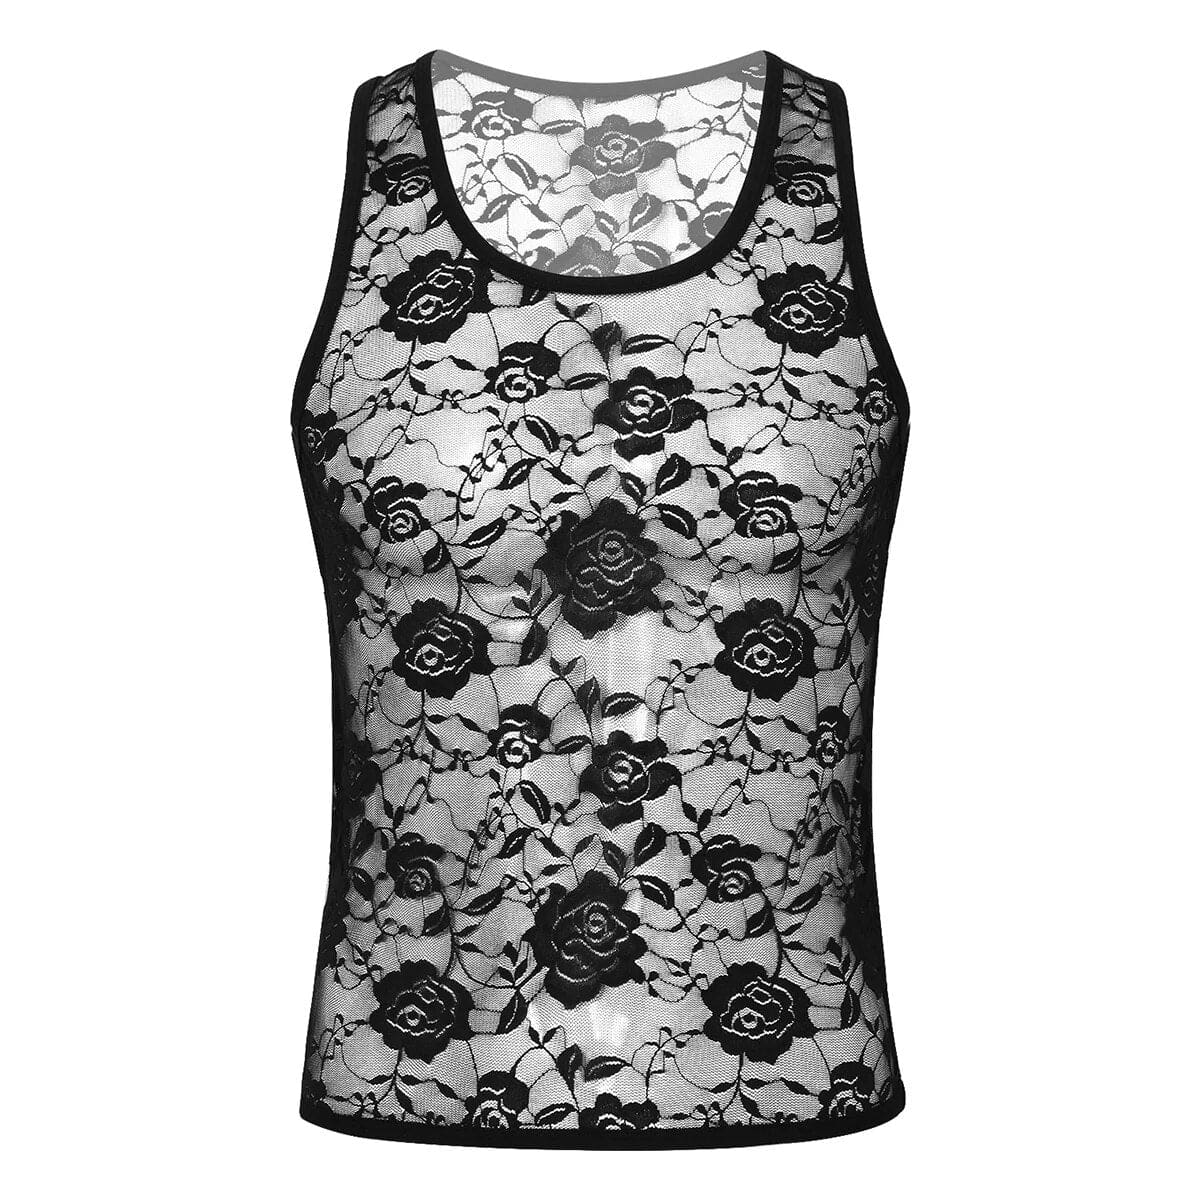 Kinky Cloth Black A / M Floral Lace Muscle Fitted Top